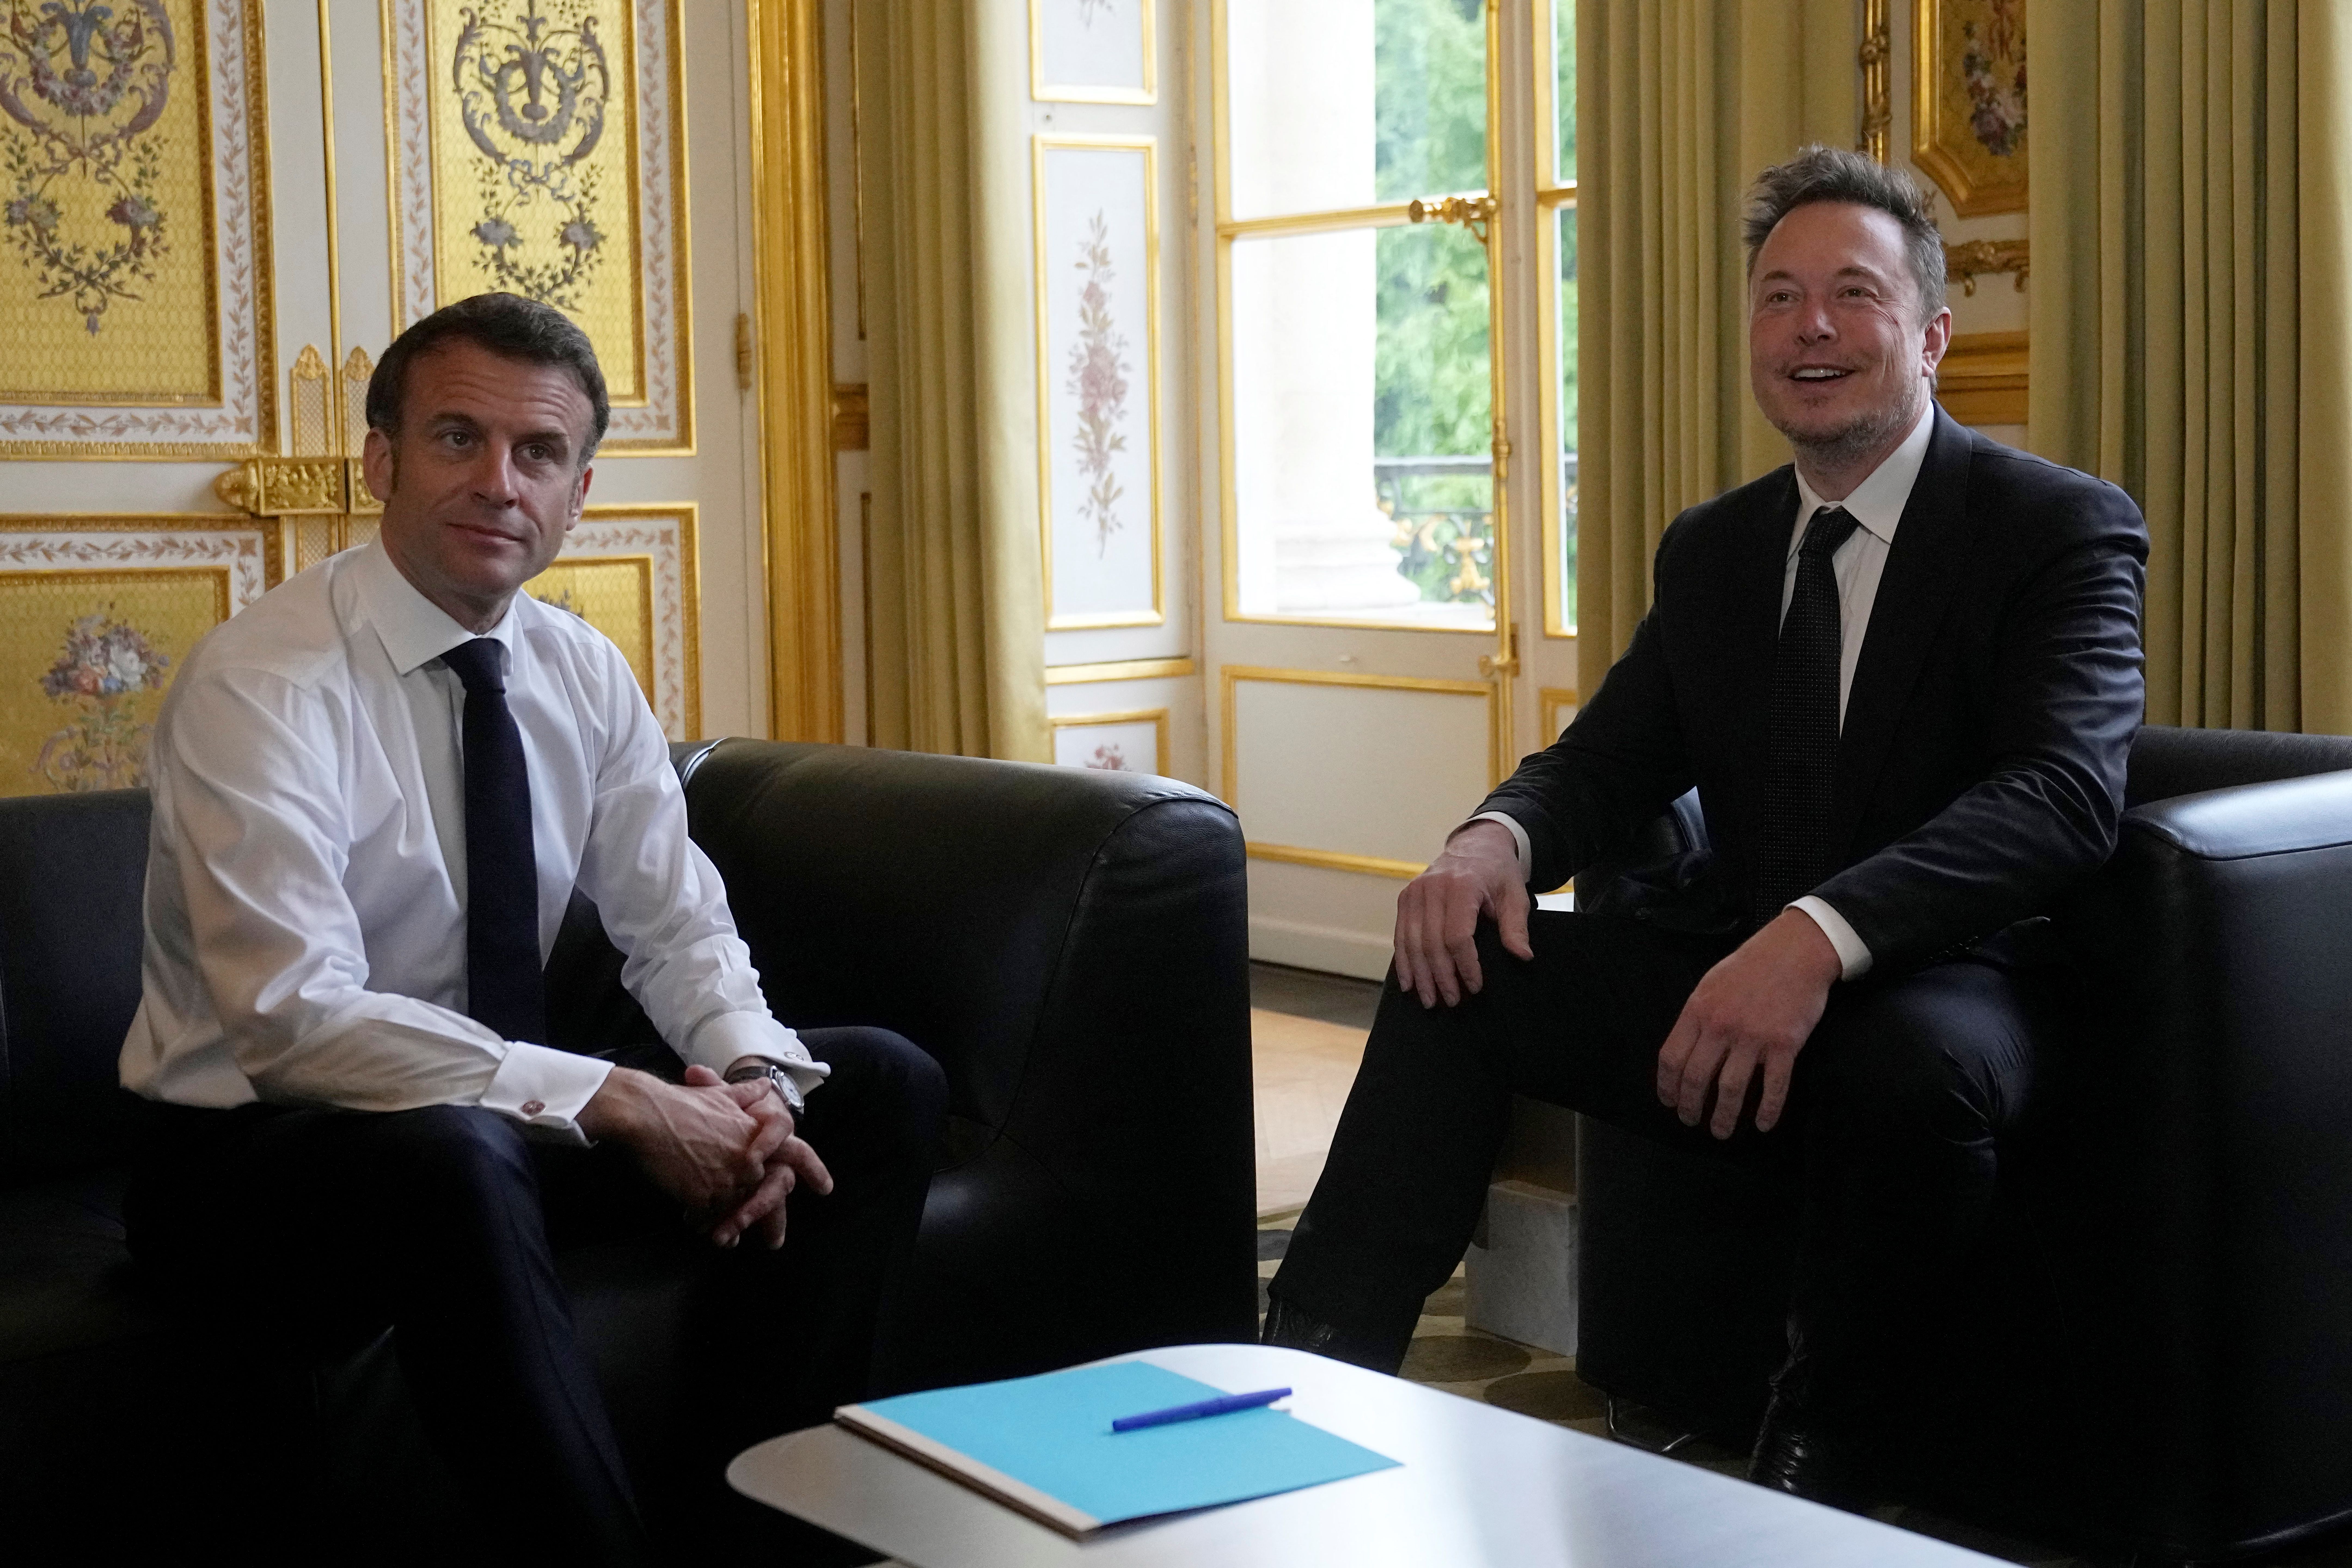 Is Macron wooing Musk to bring Tesla production to France?